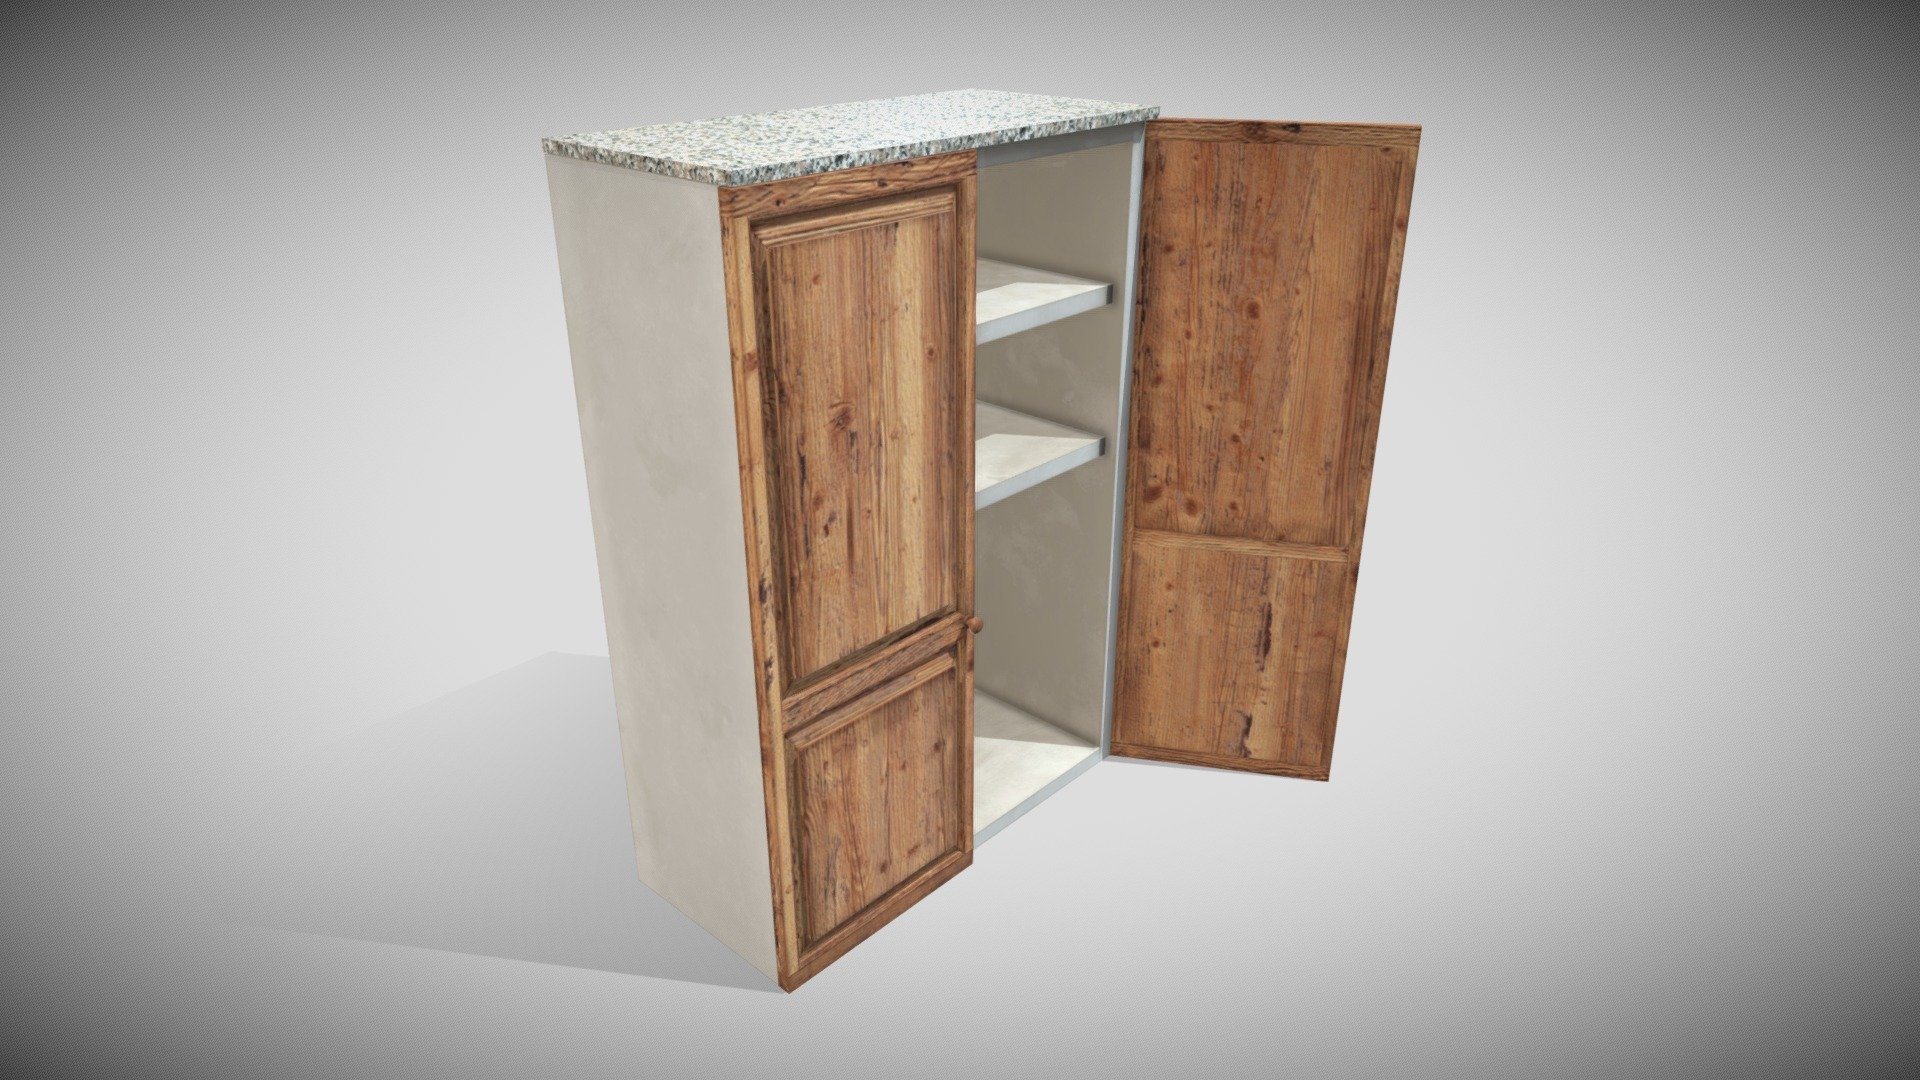 One Material PBR 4k Metalness

Pivot at Zero Bottom

Size OK

Door is separate object with Pivot in right place and can be animated

Complete Compilatio https://skfb.ly/ovXFn - Kitchen Modules - Mod C - Buy Royalty Free 3D model by Francesco Coldesina (@topfrank2013) 3d model